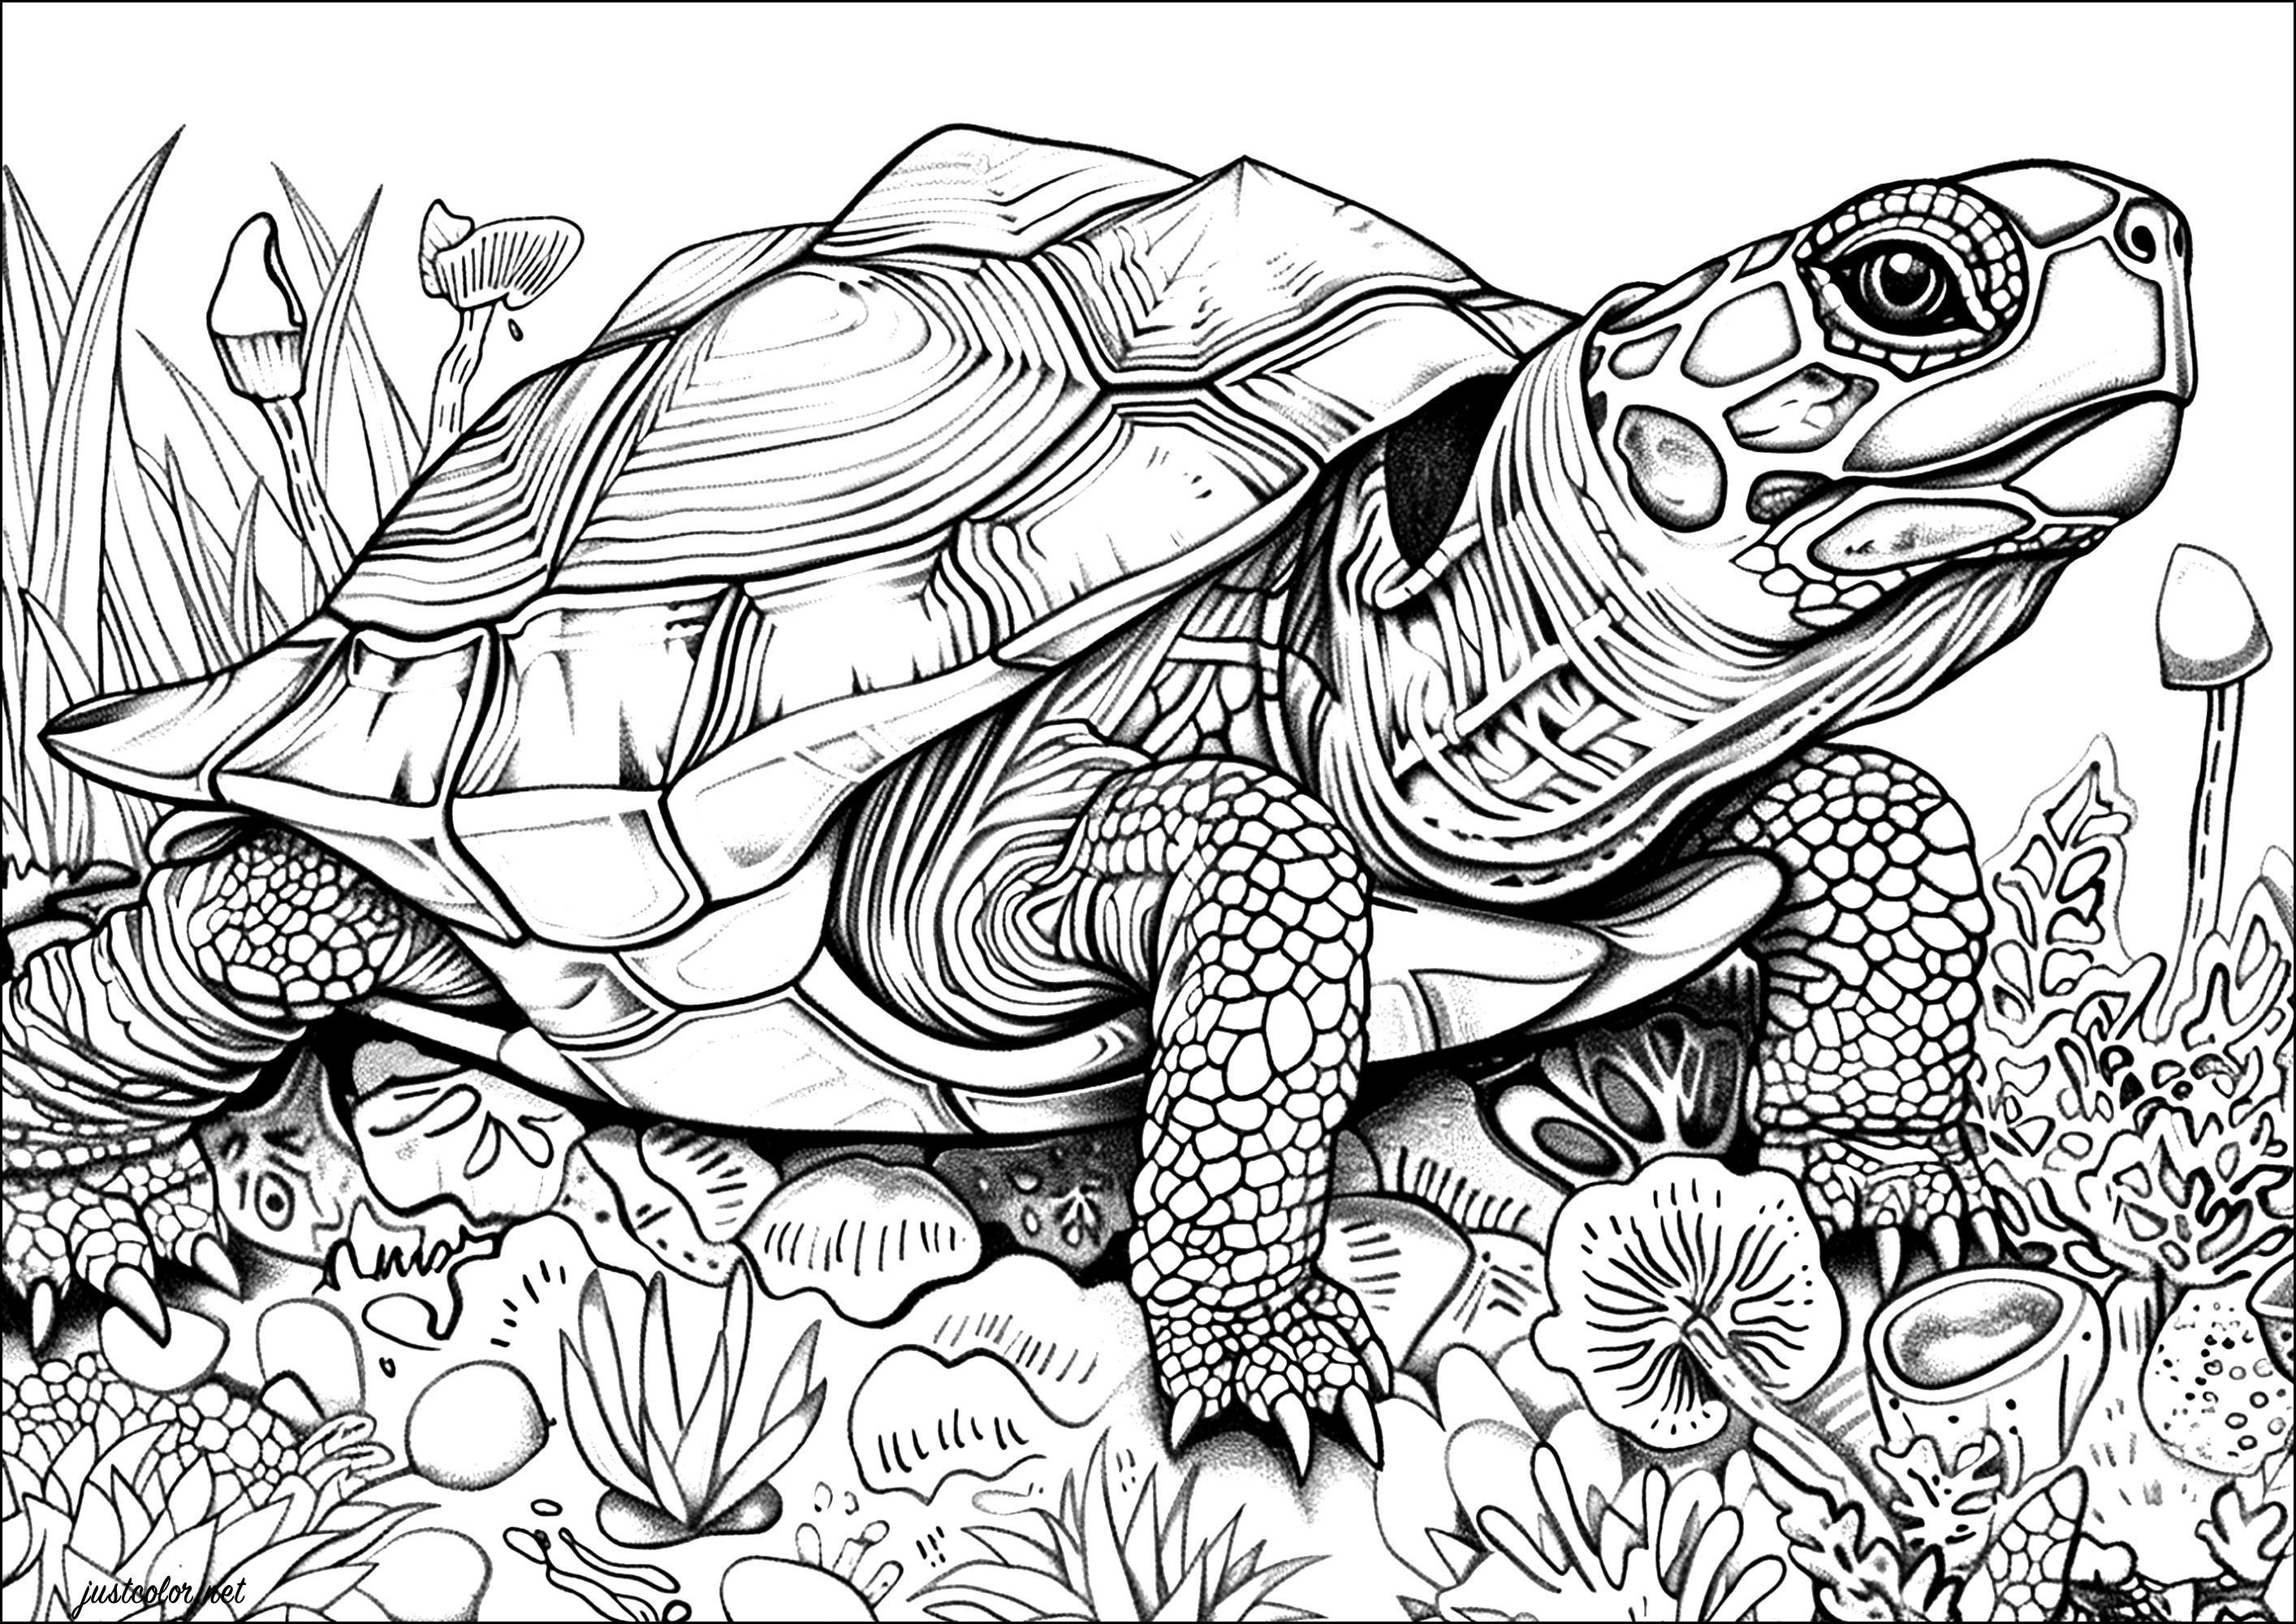 Realistic turtle coloring page with lots of details to color. The scales on this turtle's shell are meticulously depicted, giving the impression of being able to touch them with your fingertips.Grab your colored pencils or felt-tip pens and let yourself be carried away by the beauty of this majestic turtle.